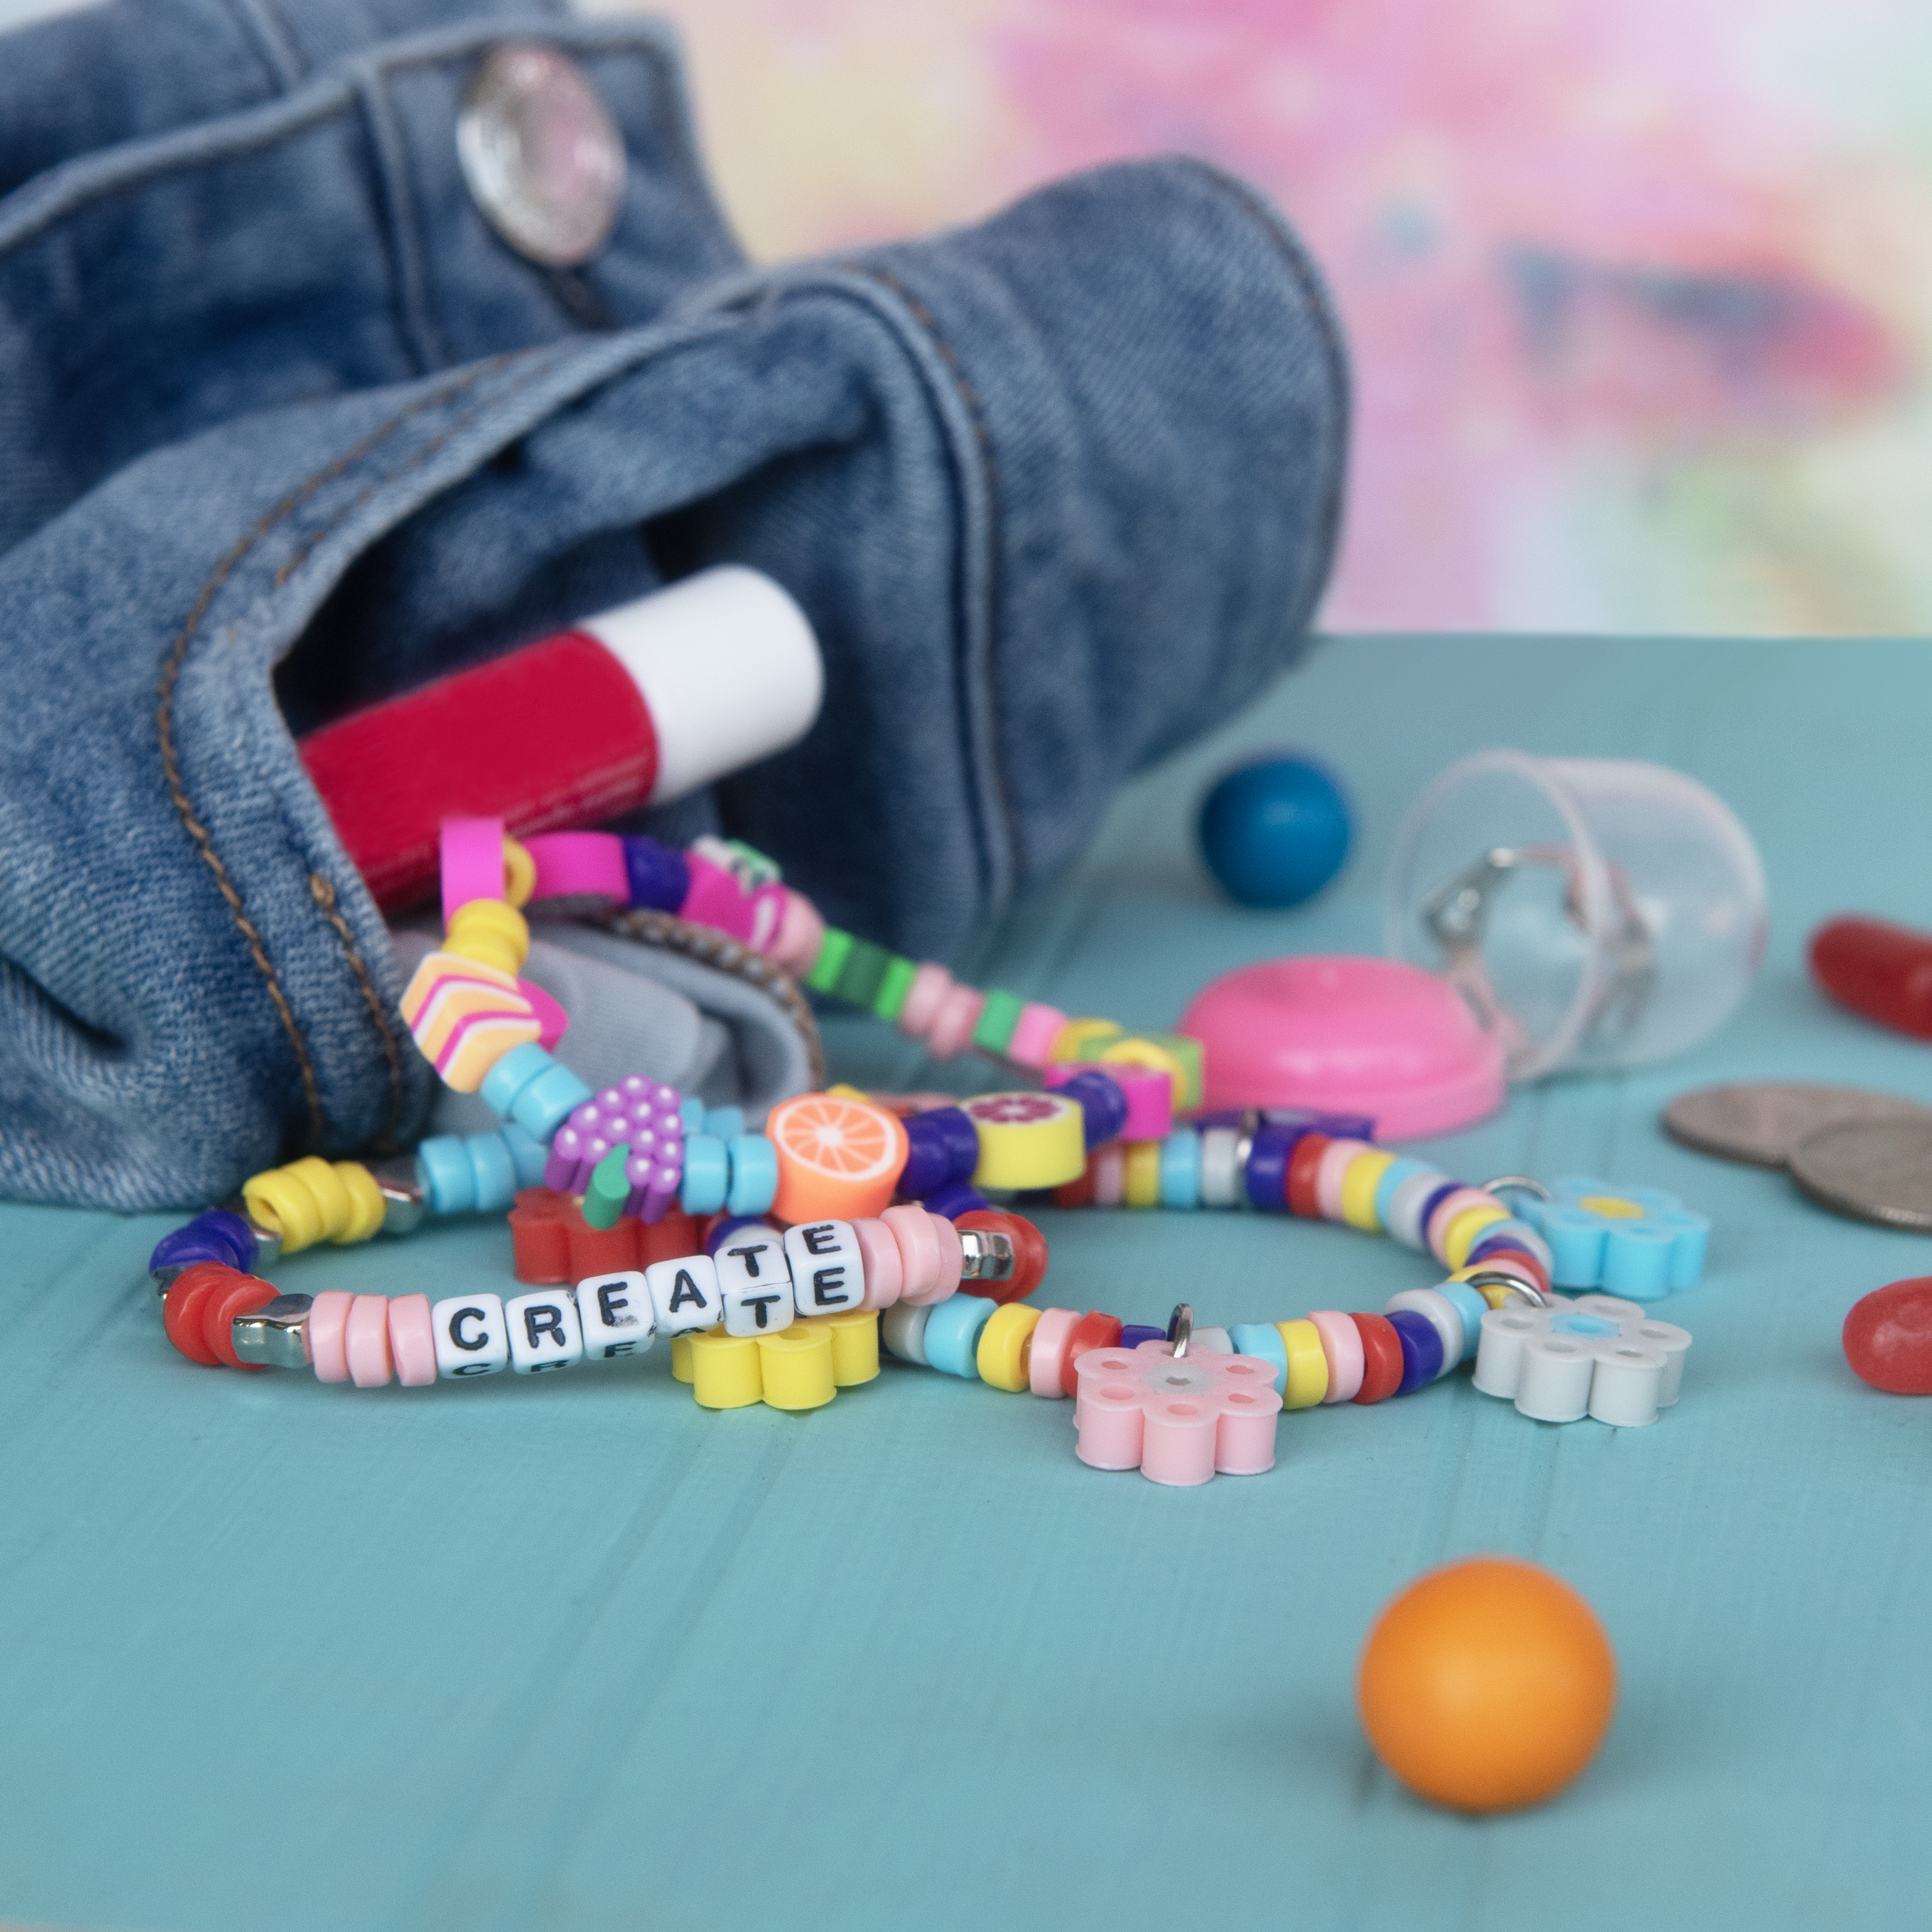 How to Make Bracelets with Perler Beads - DIY Candy